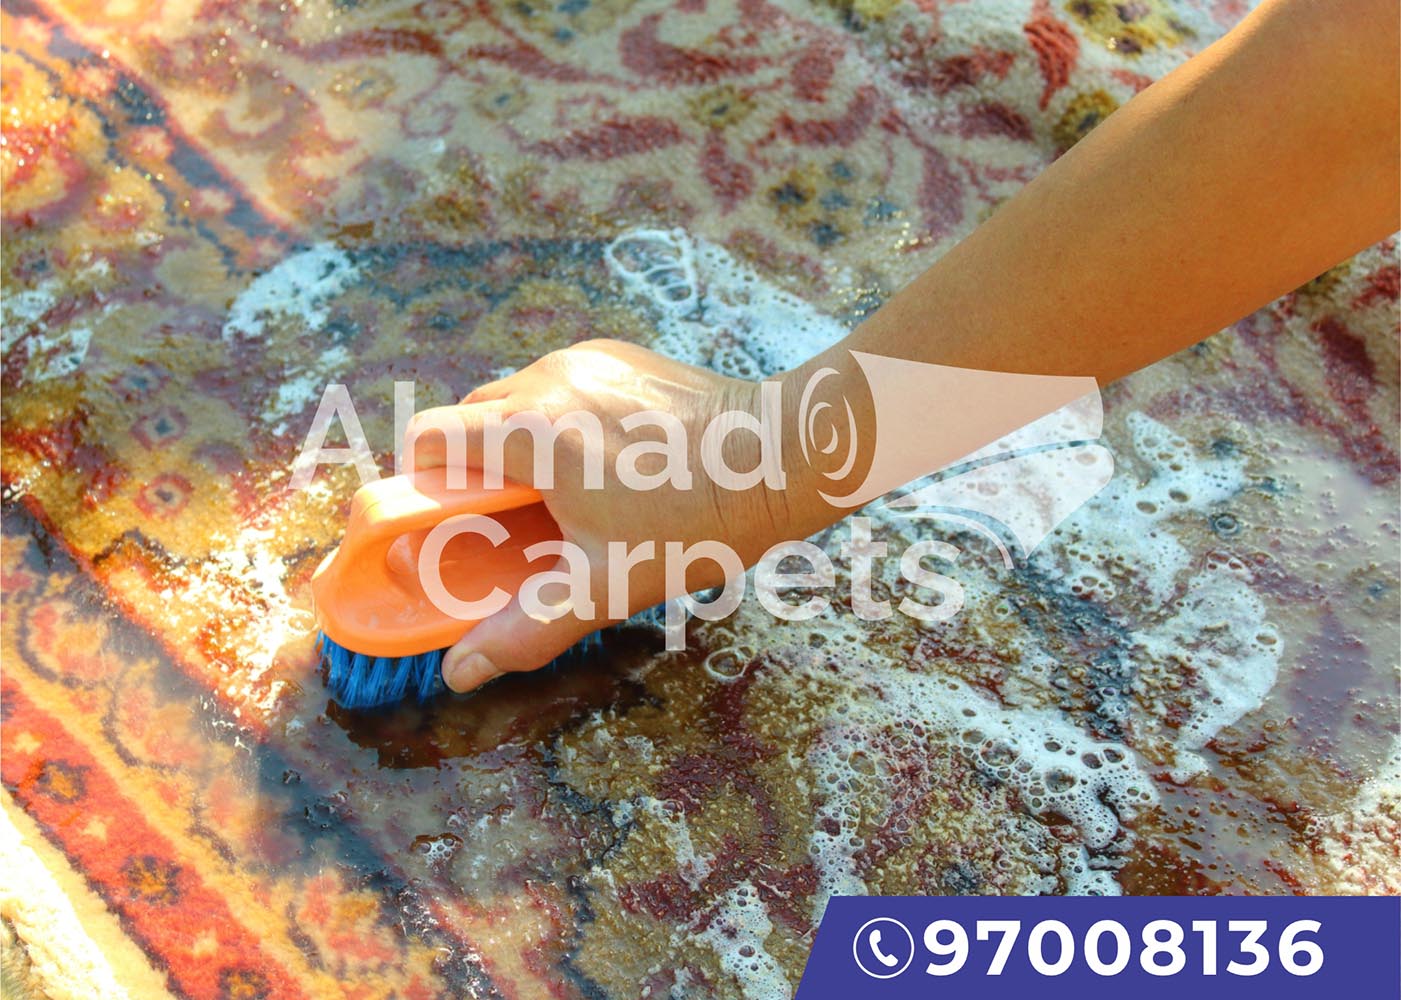 Hong Kong best carpet cleaning services by Ahmad carpet cleaning Shop